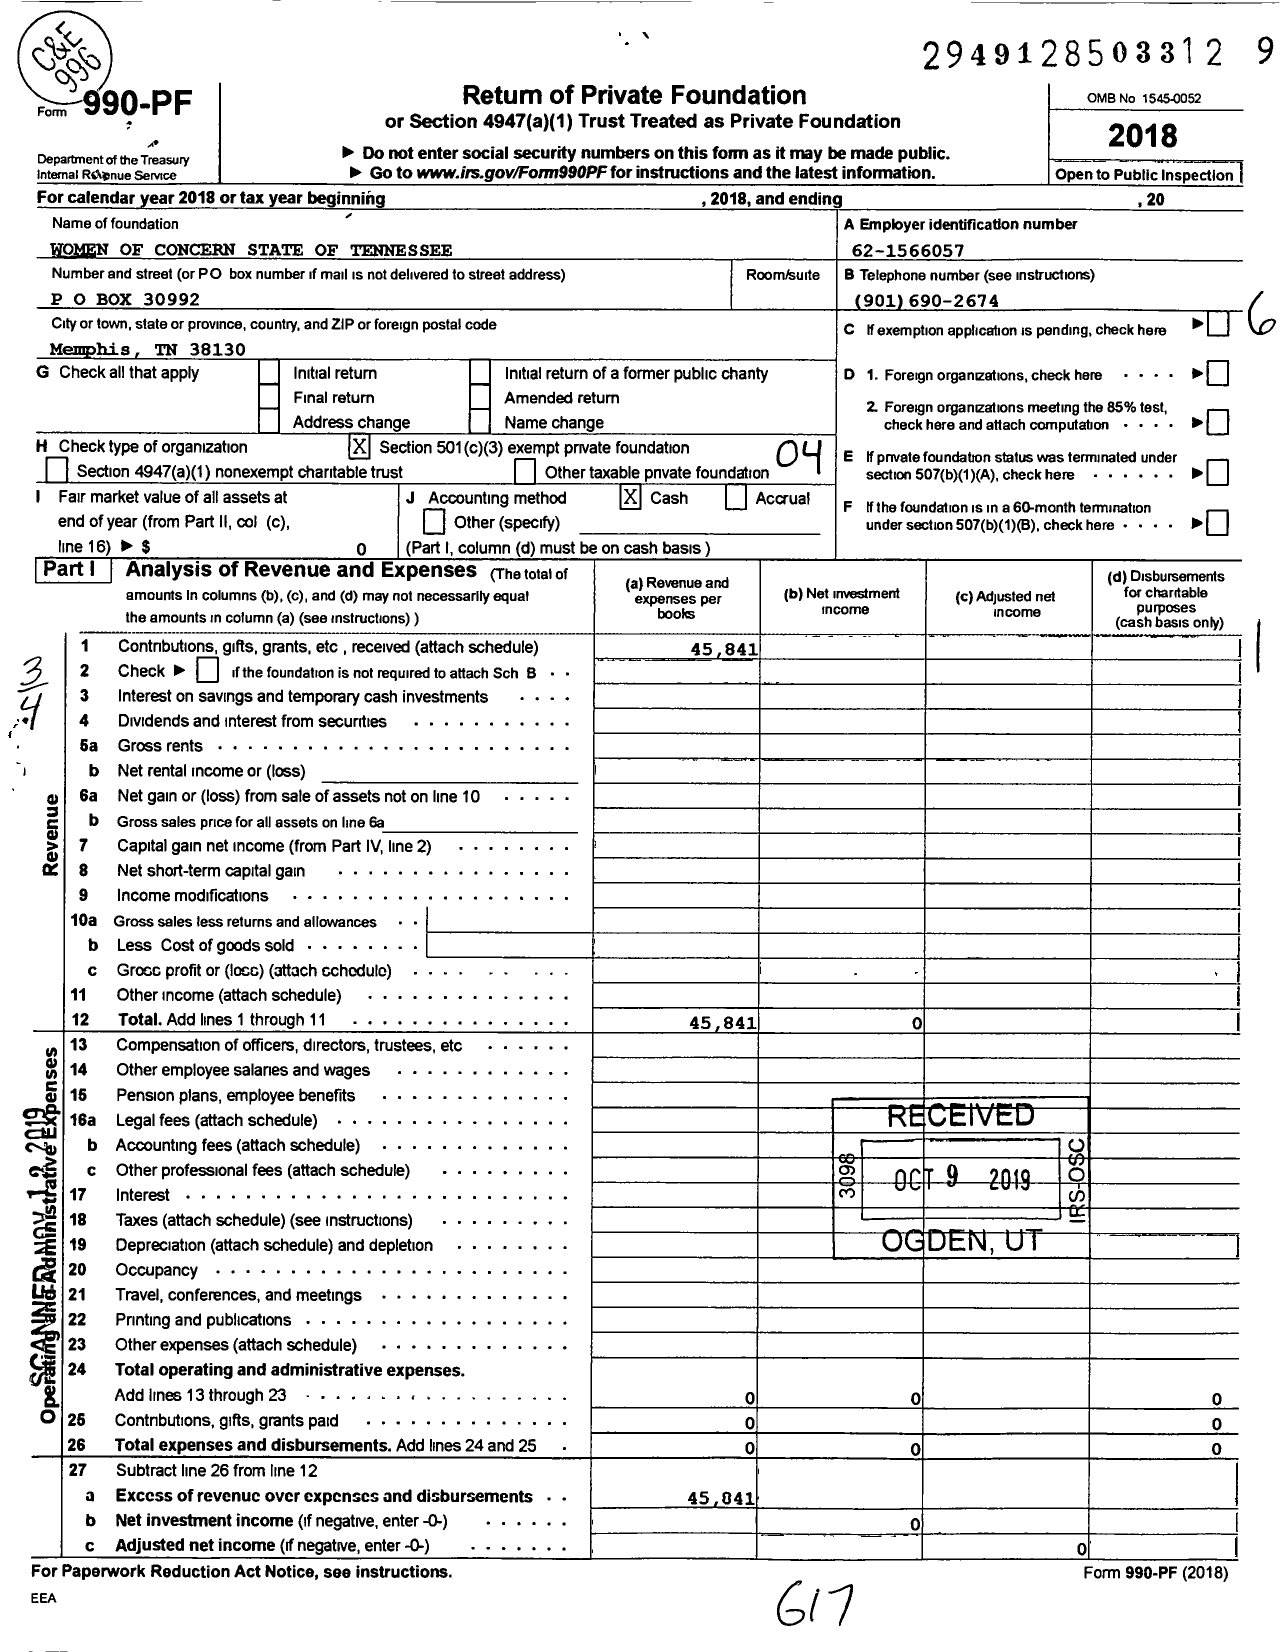 Image of first page of 2018 Form 990PF for Women of Concern State of Tennessee